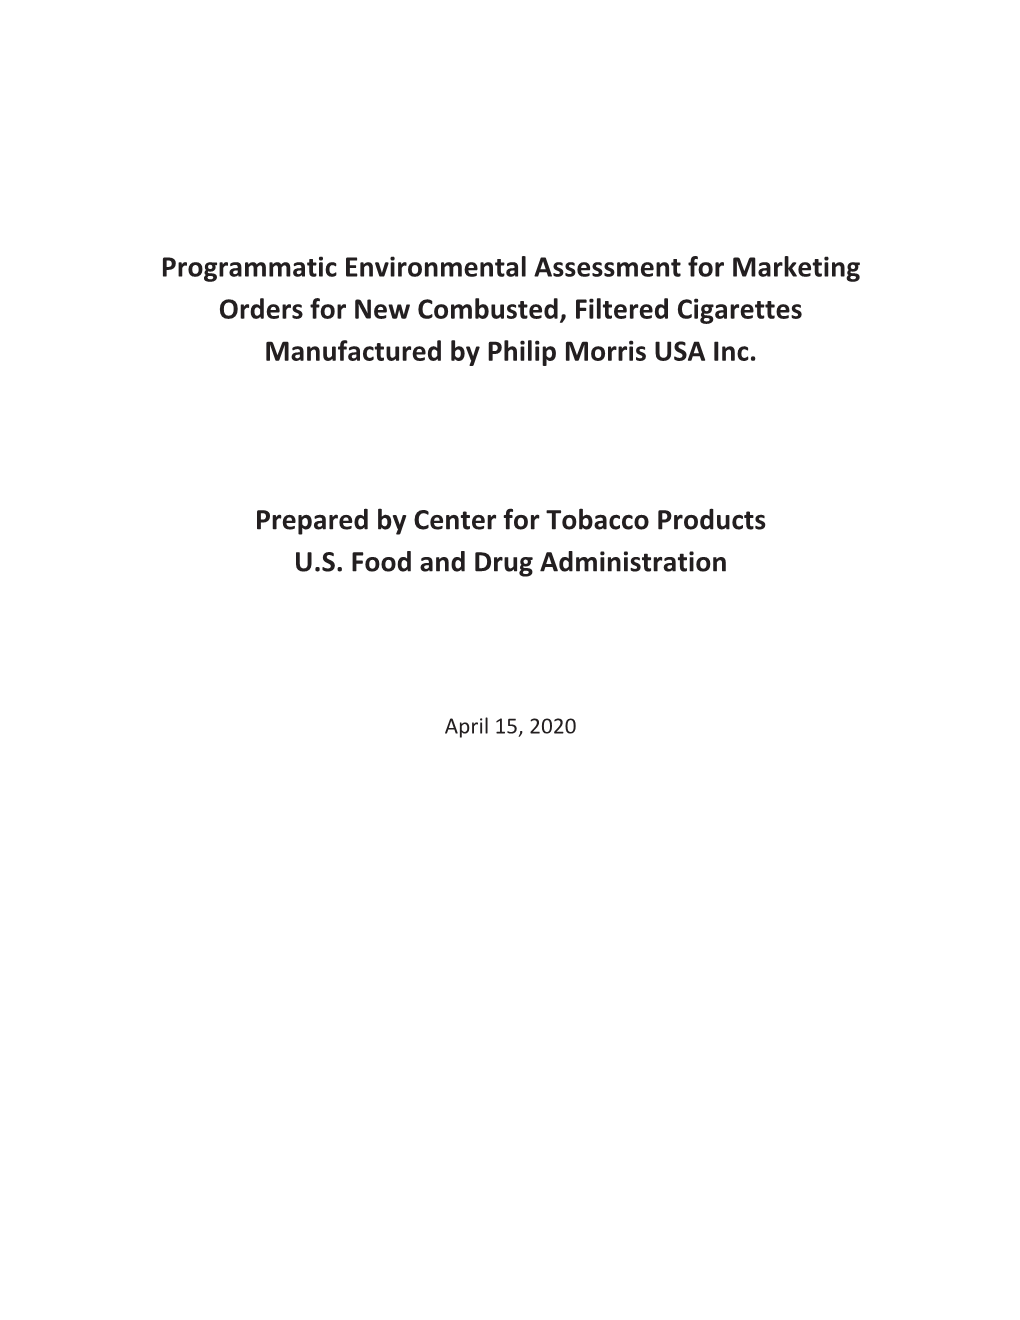 Programmatic Environmental Assessment for Marketing Orders for New Combusted, Filtered Cigarettes Manufactured by Philip Morris USA Inc